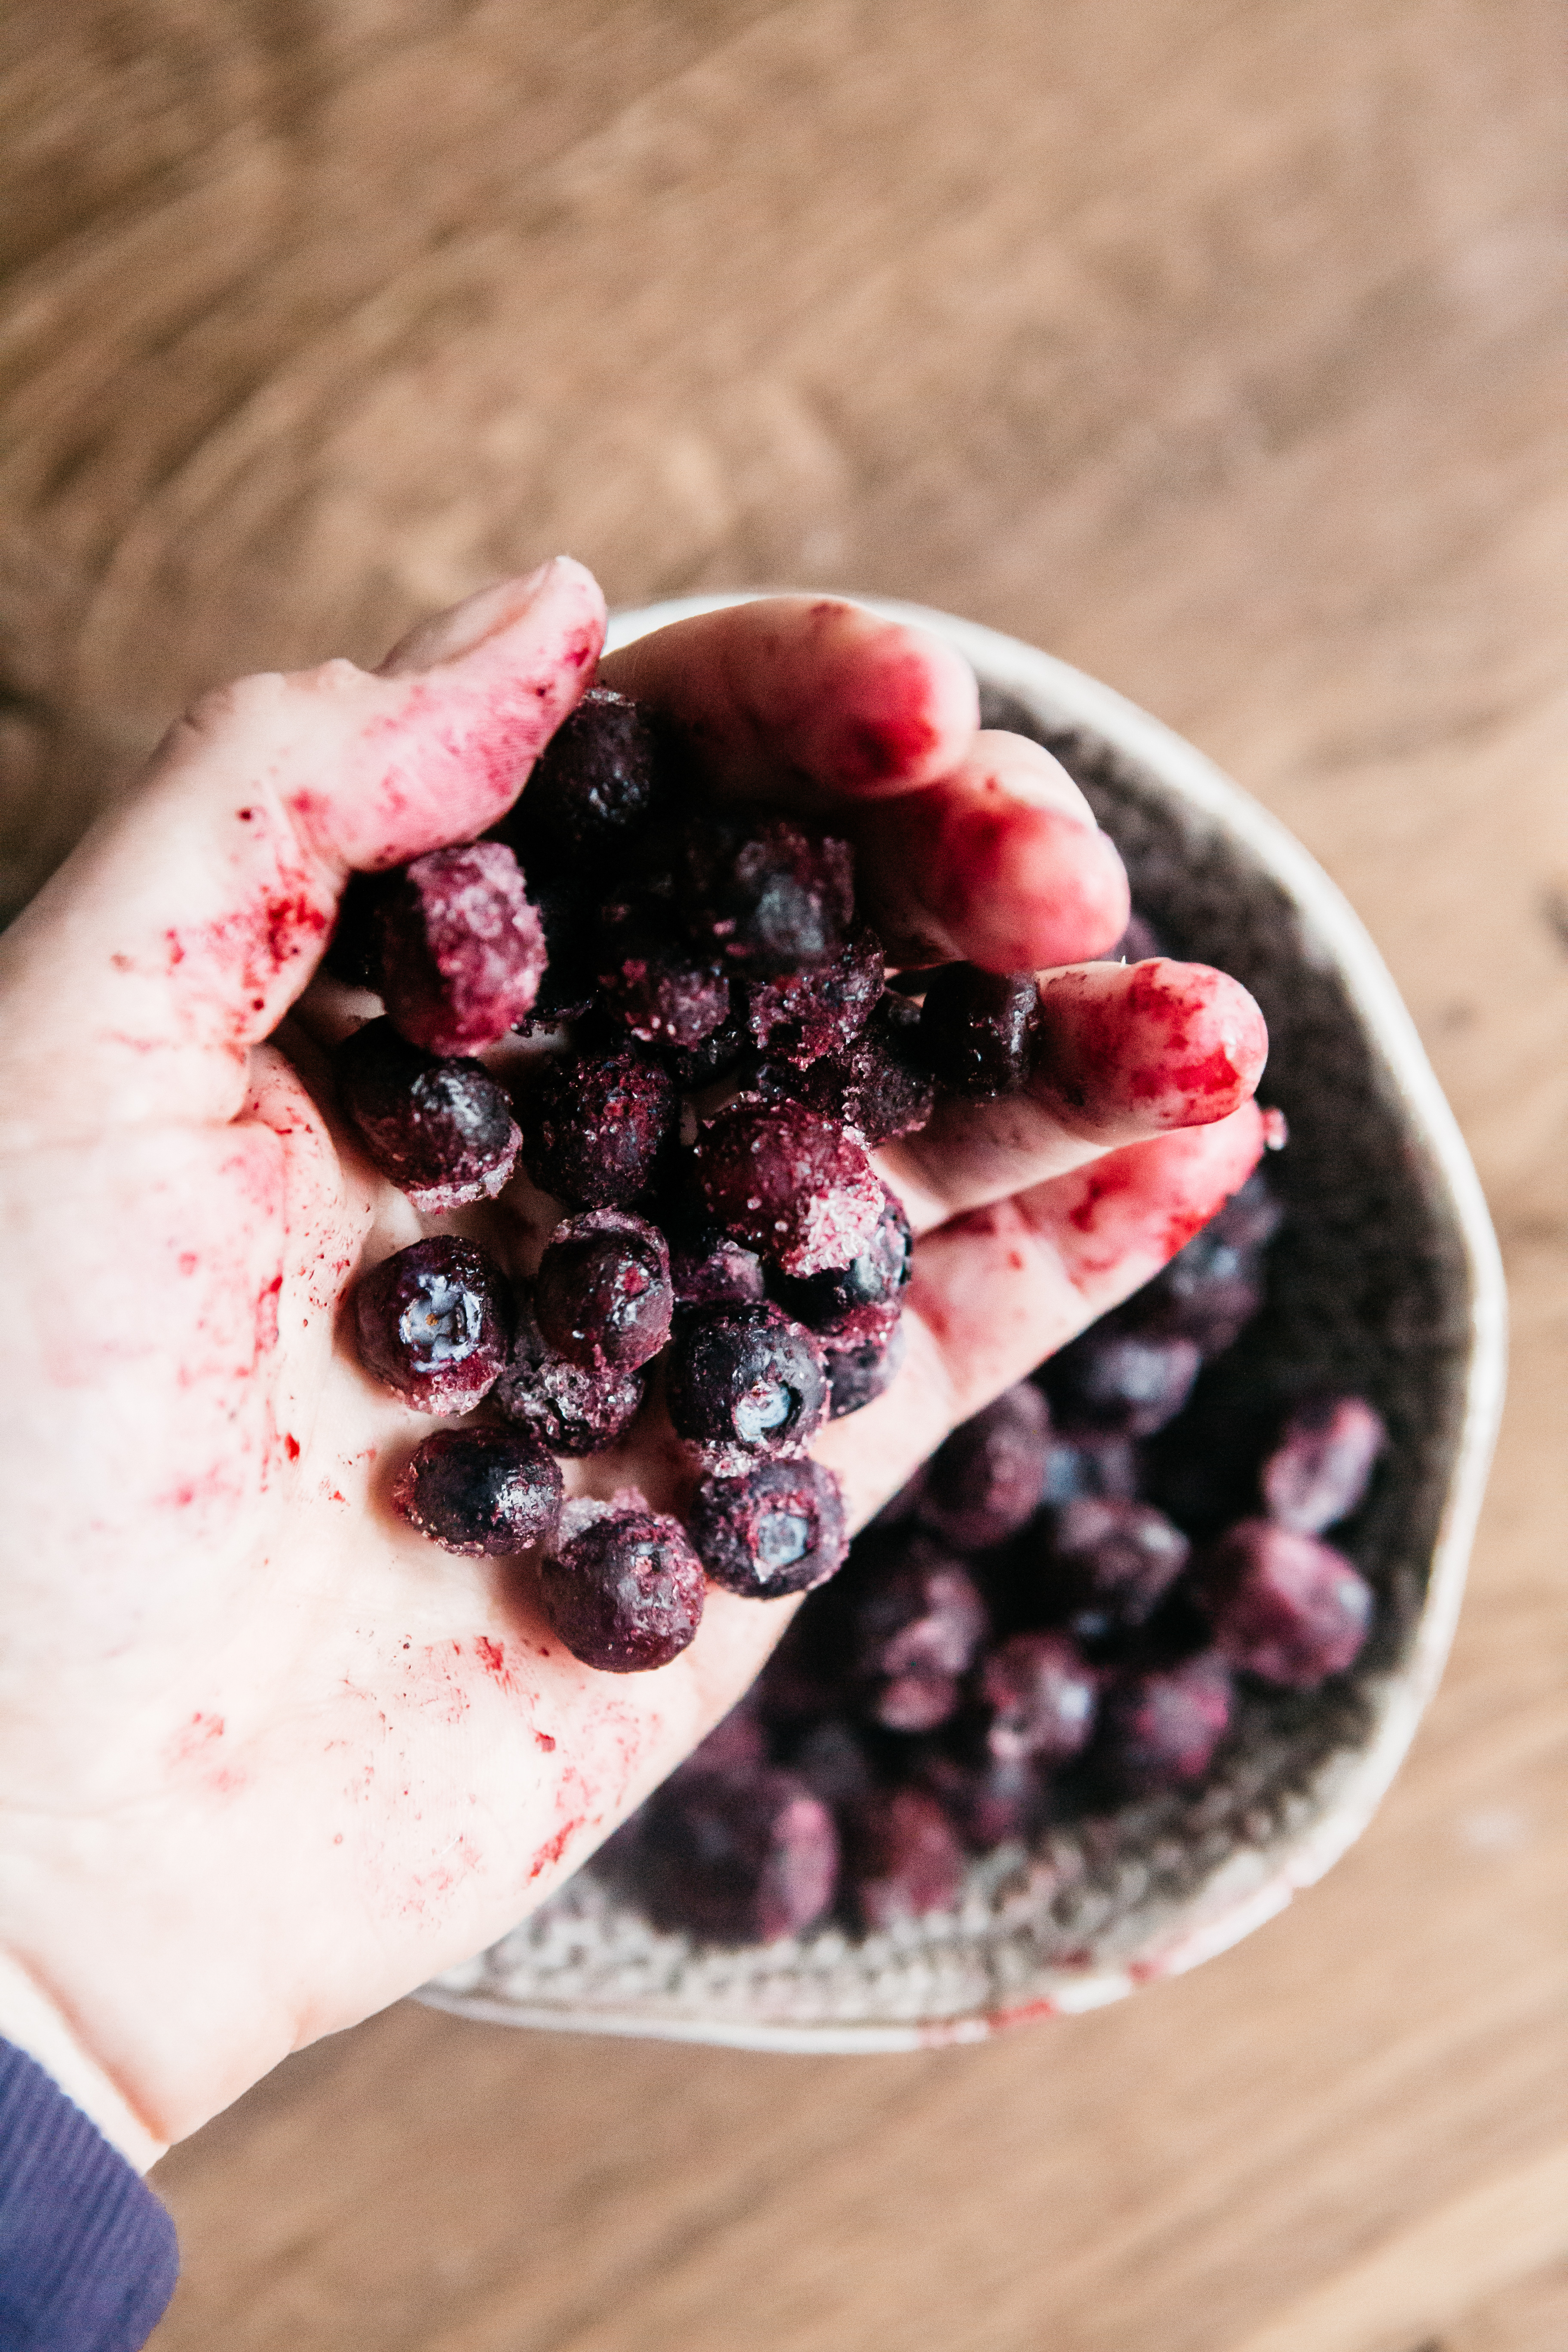 Blueberries in a hand 